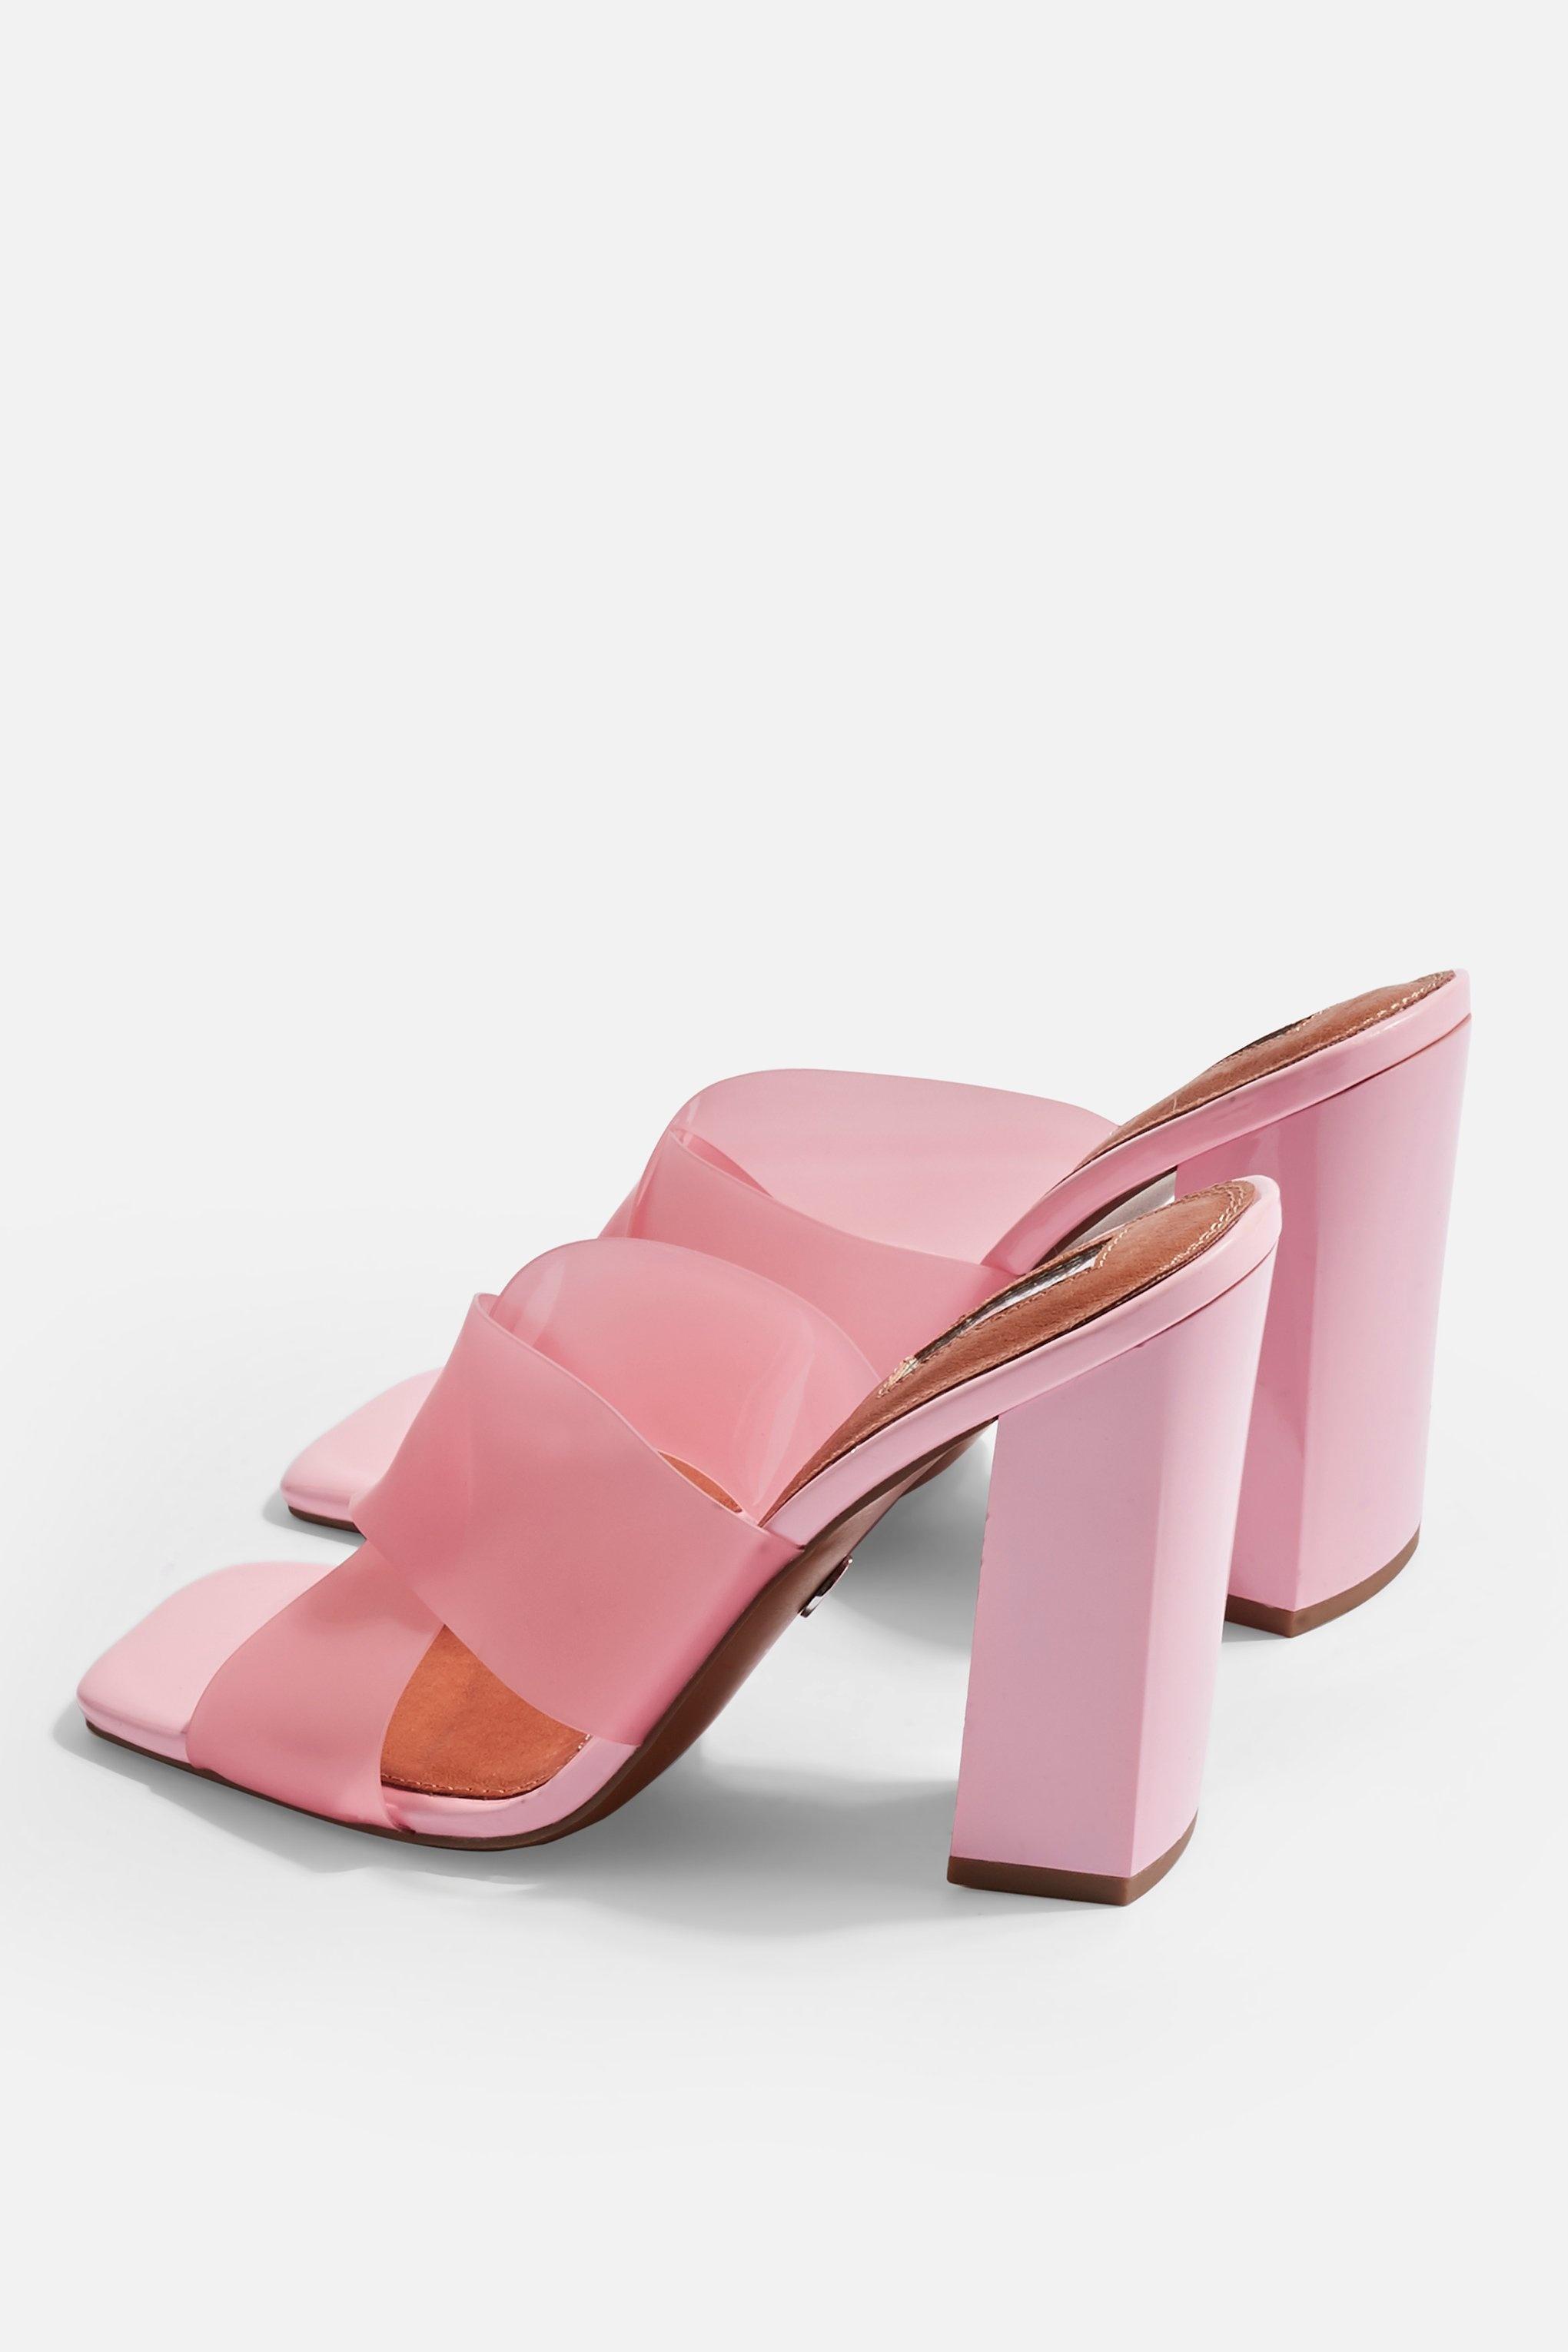 topshop pink shoes